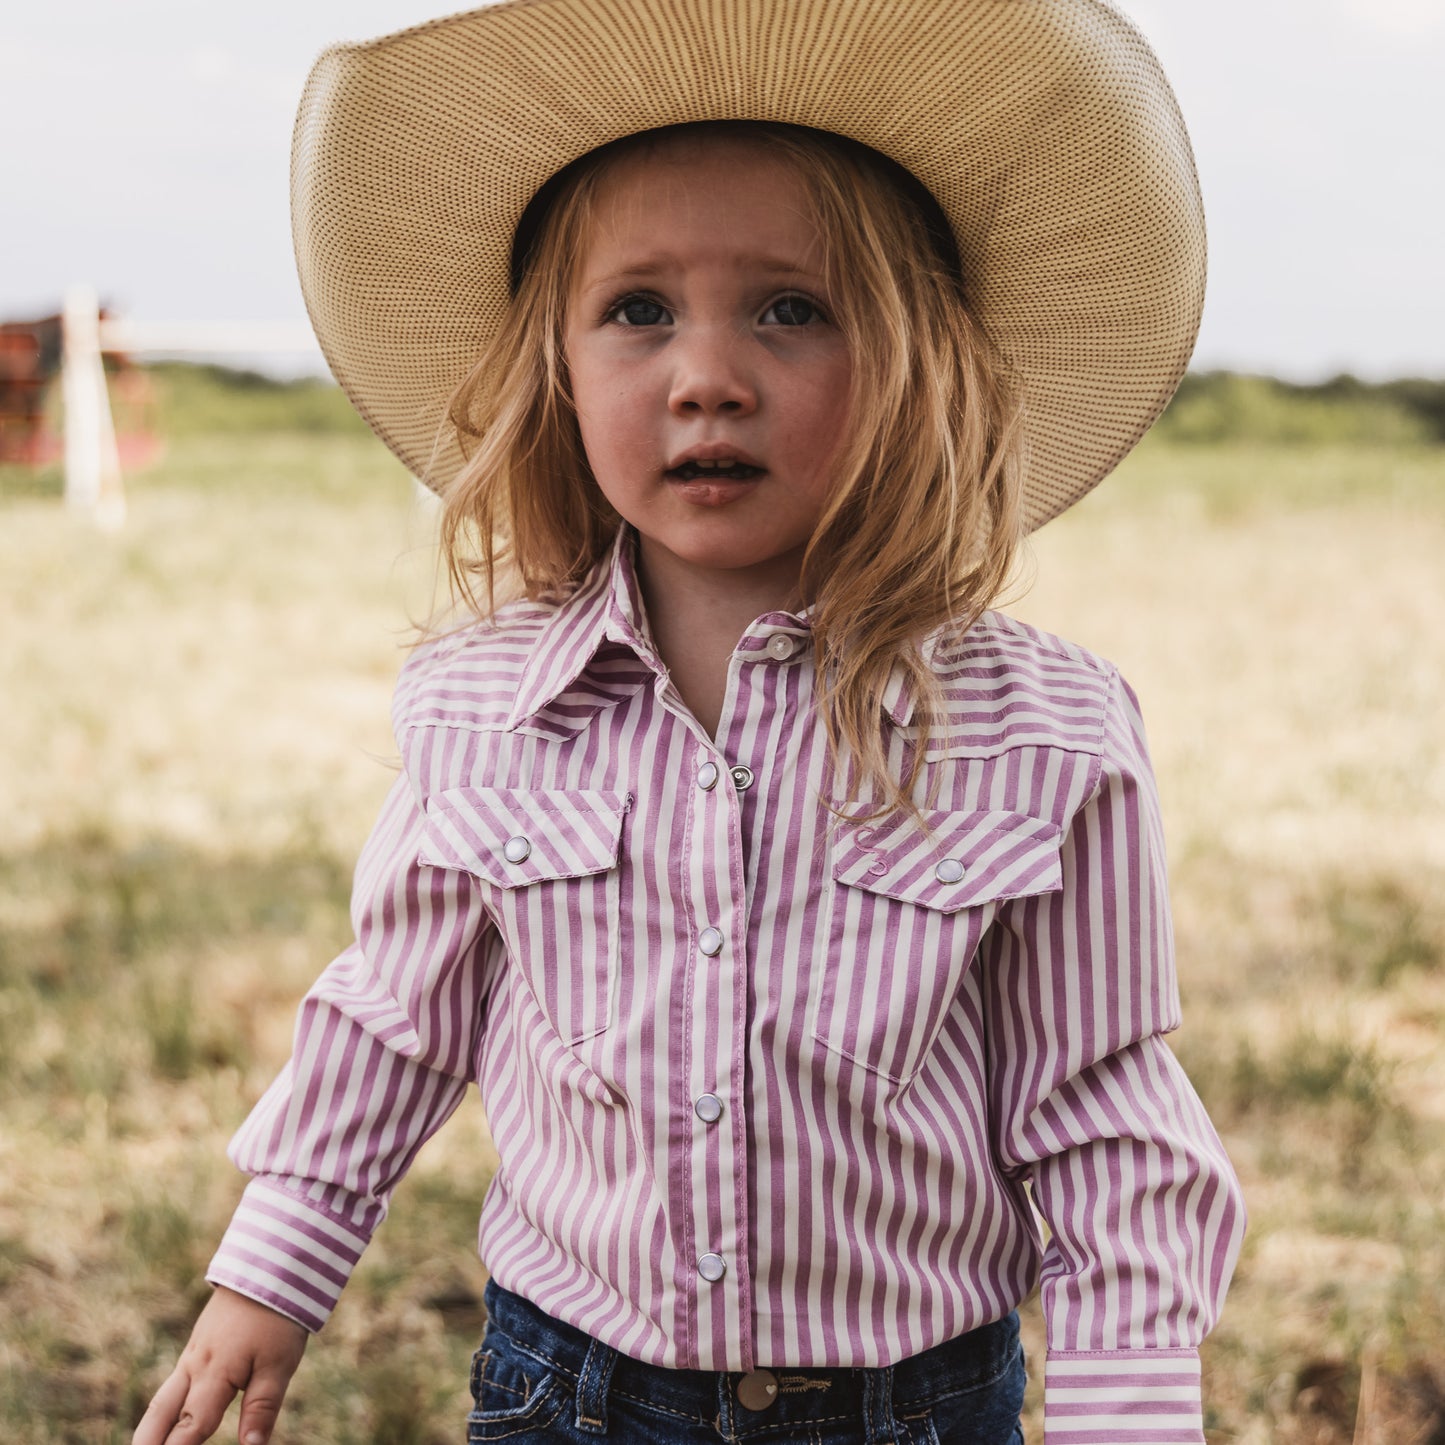 Pink & White Stripe Long Sleeve Pearl Snap – Cowkid Clothing Company